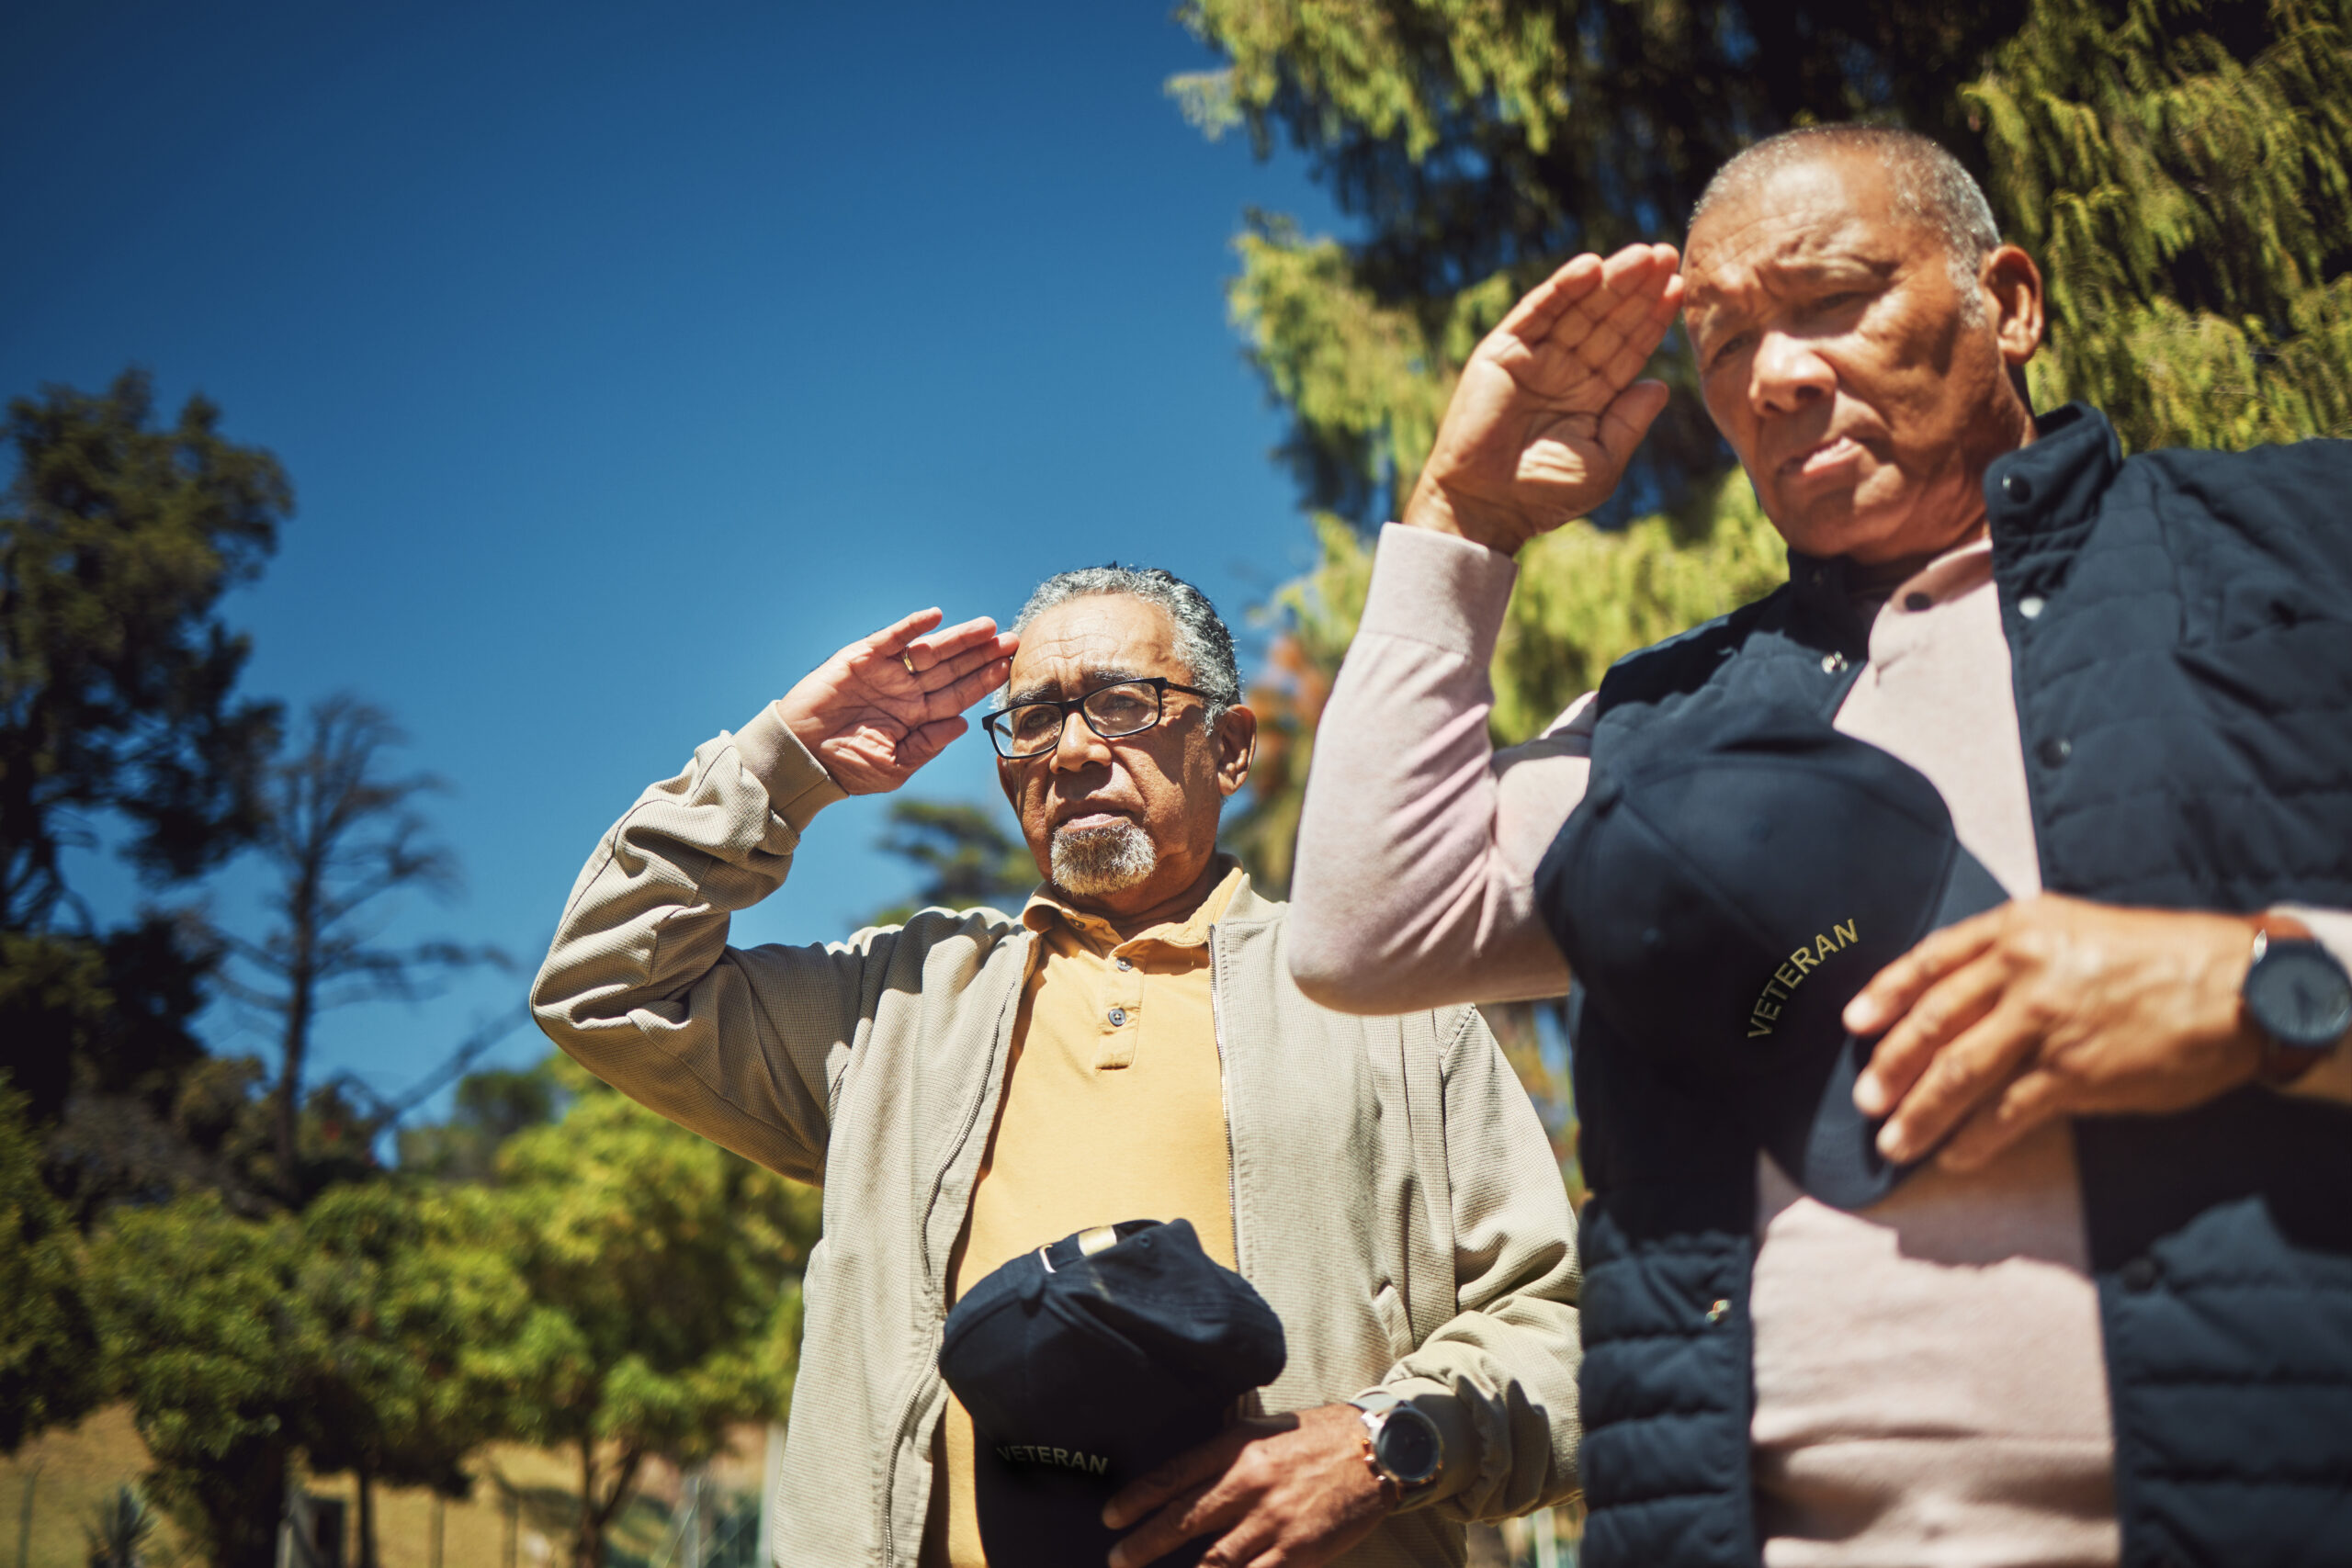 Two elderly Veterans saluting with their right hands on their forehead. Each man has a hat in their left hand. Trees and clear skies are in the background.